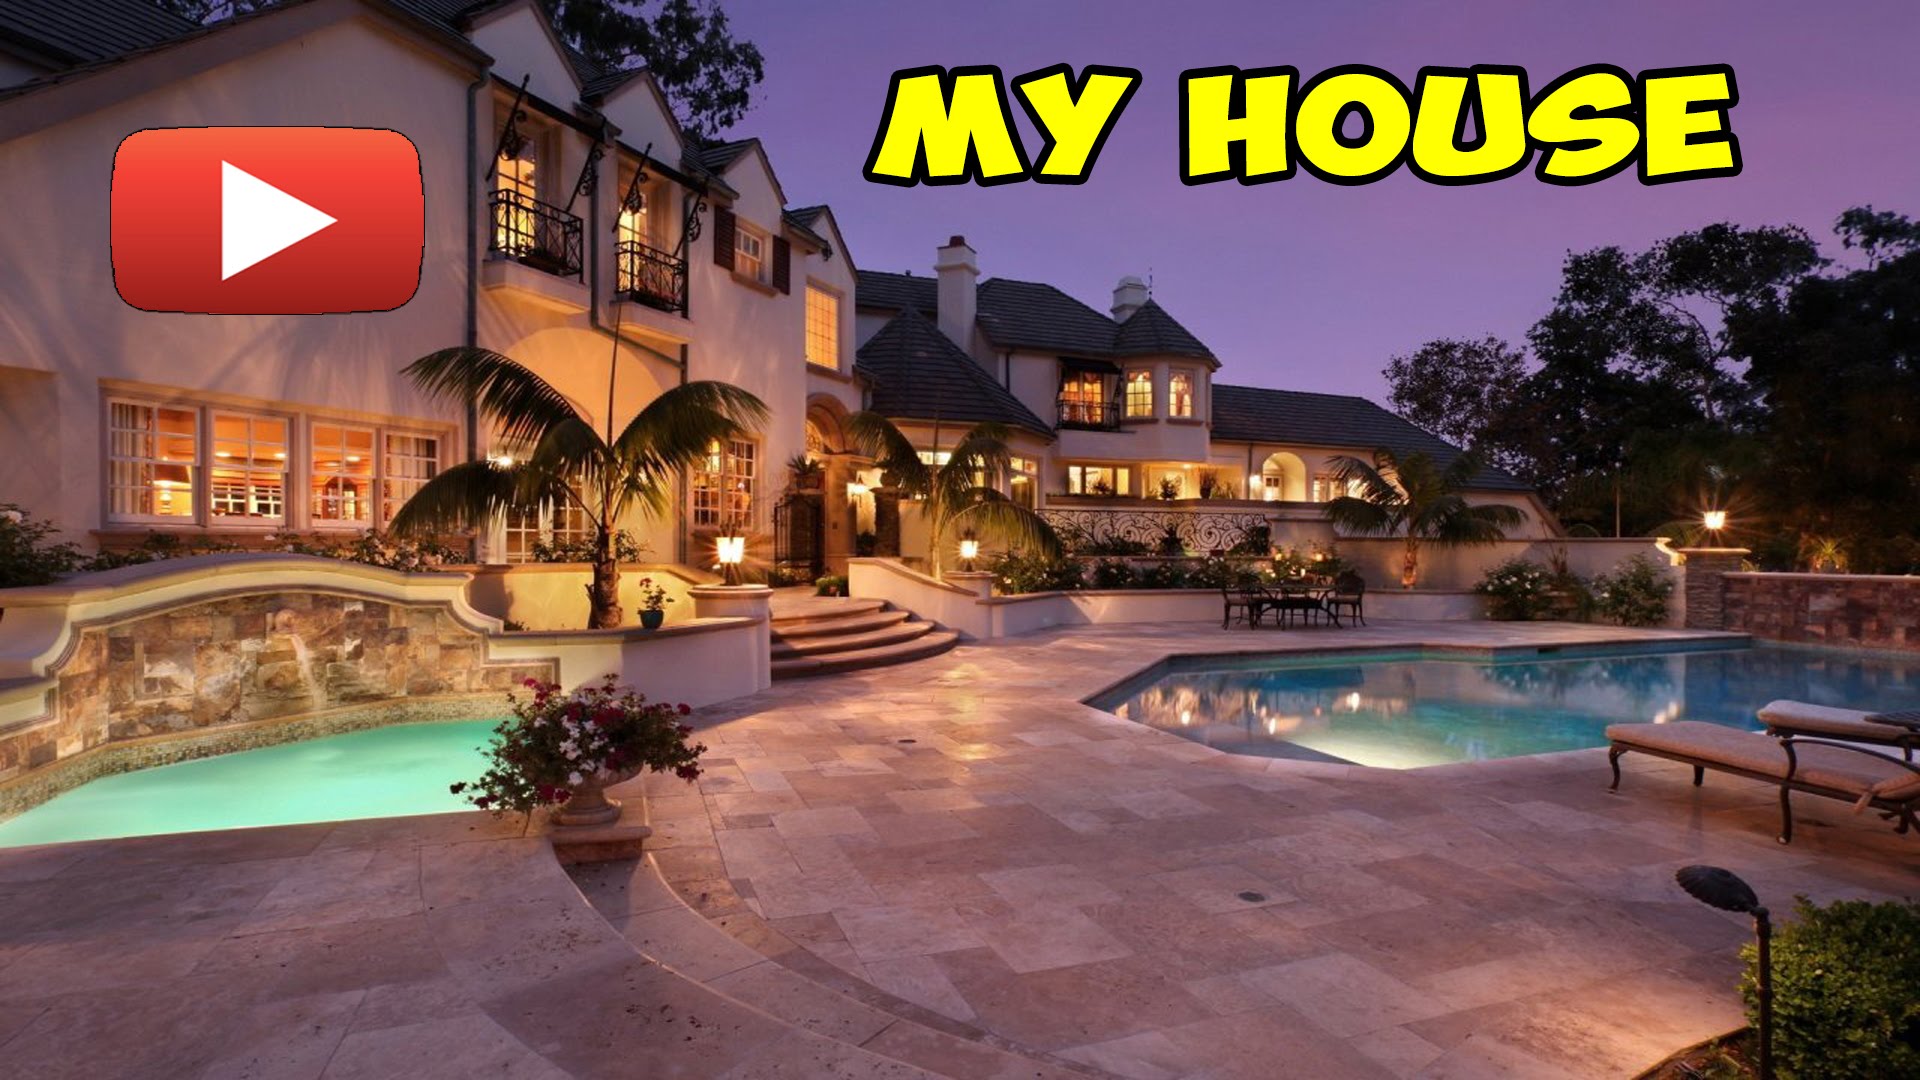 EPIC HOUSE TOUR! (YOUTUBES BIGGEST MANSION EVER) - YouTube